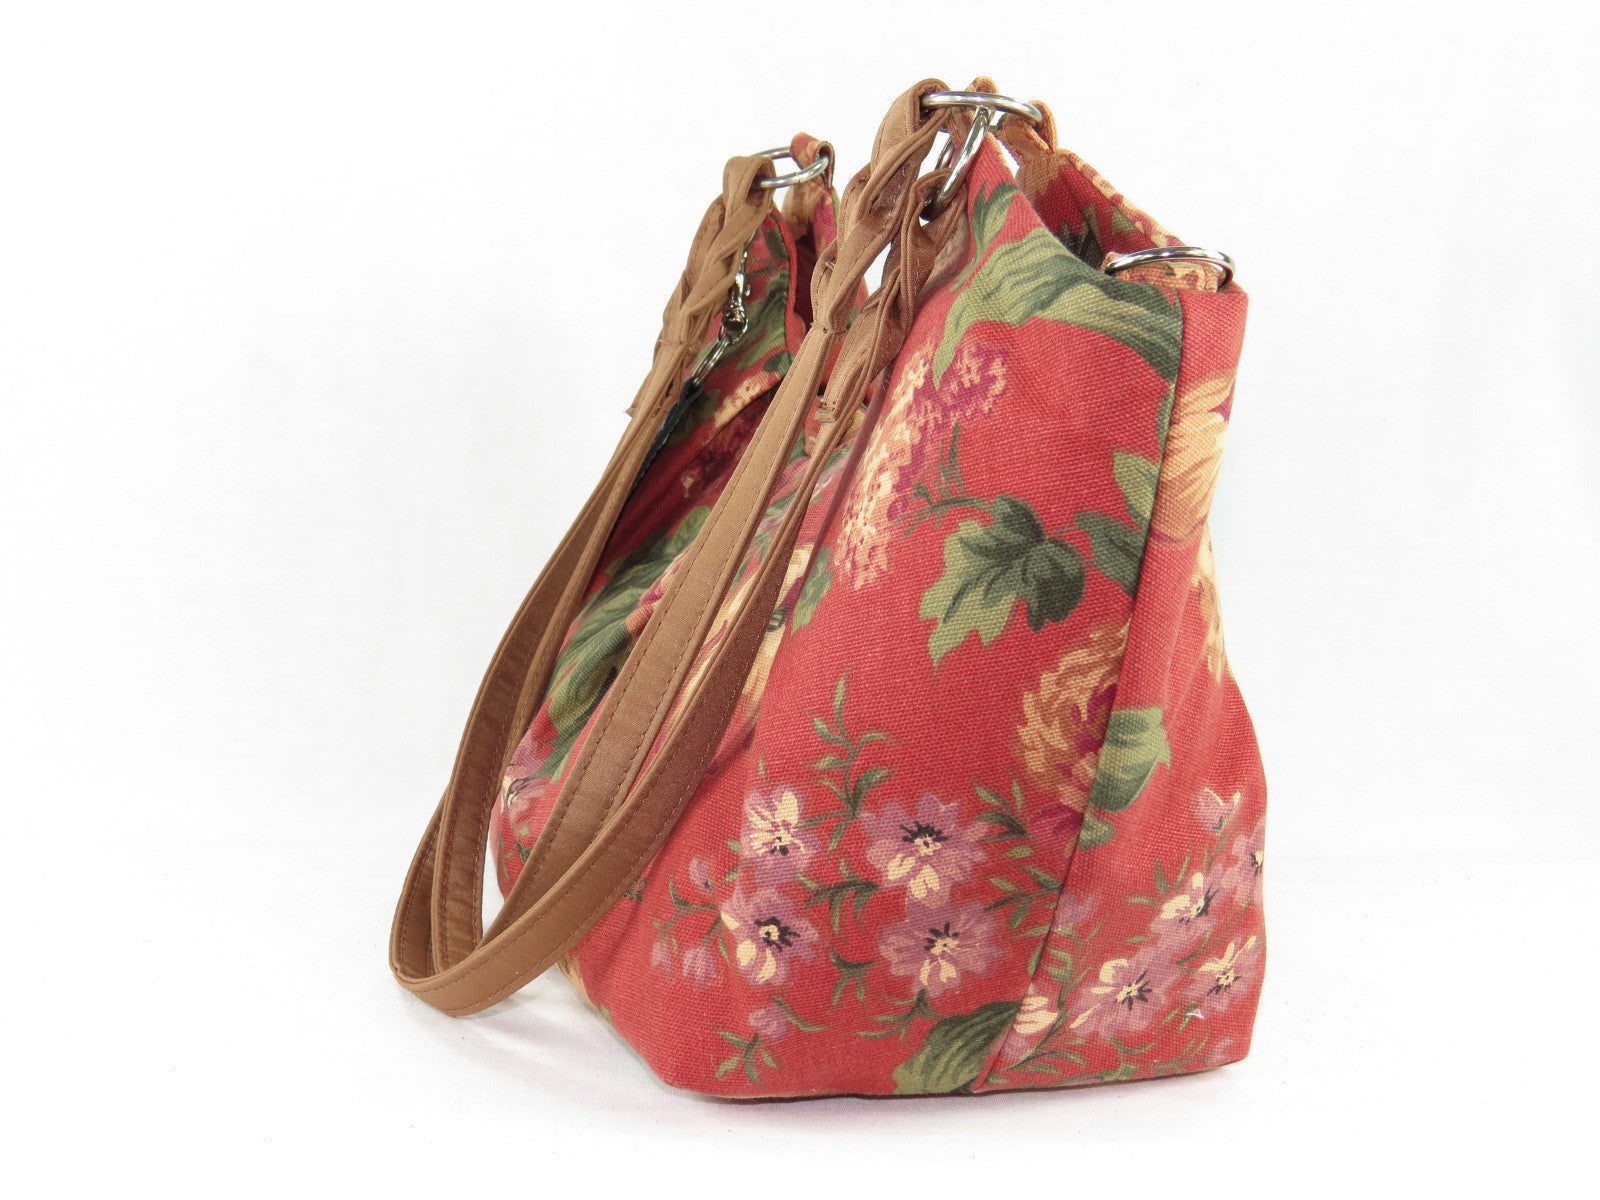 Autumn Floral Print on Canvas Tote Style Handbag side view